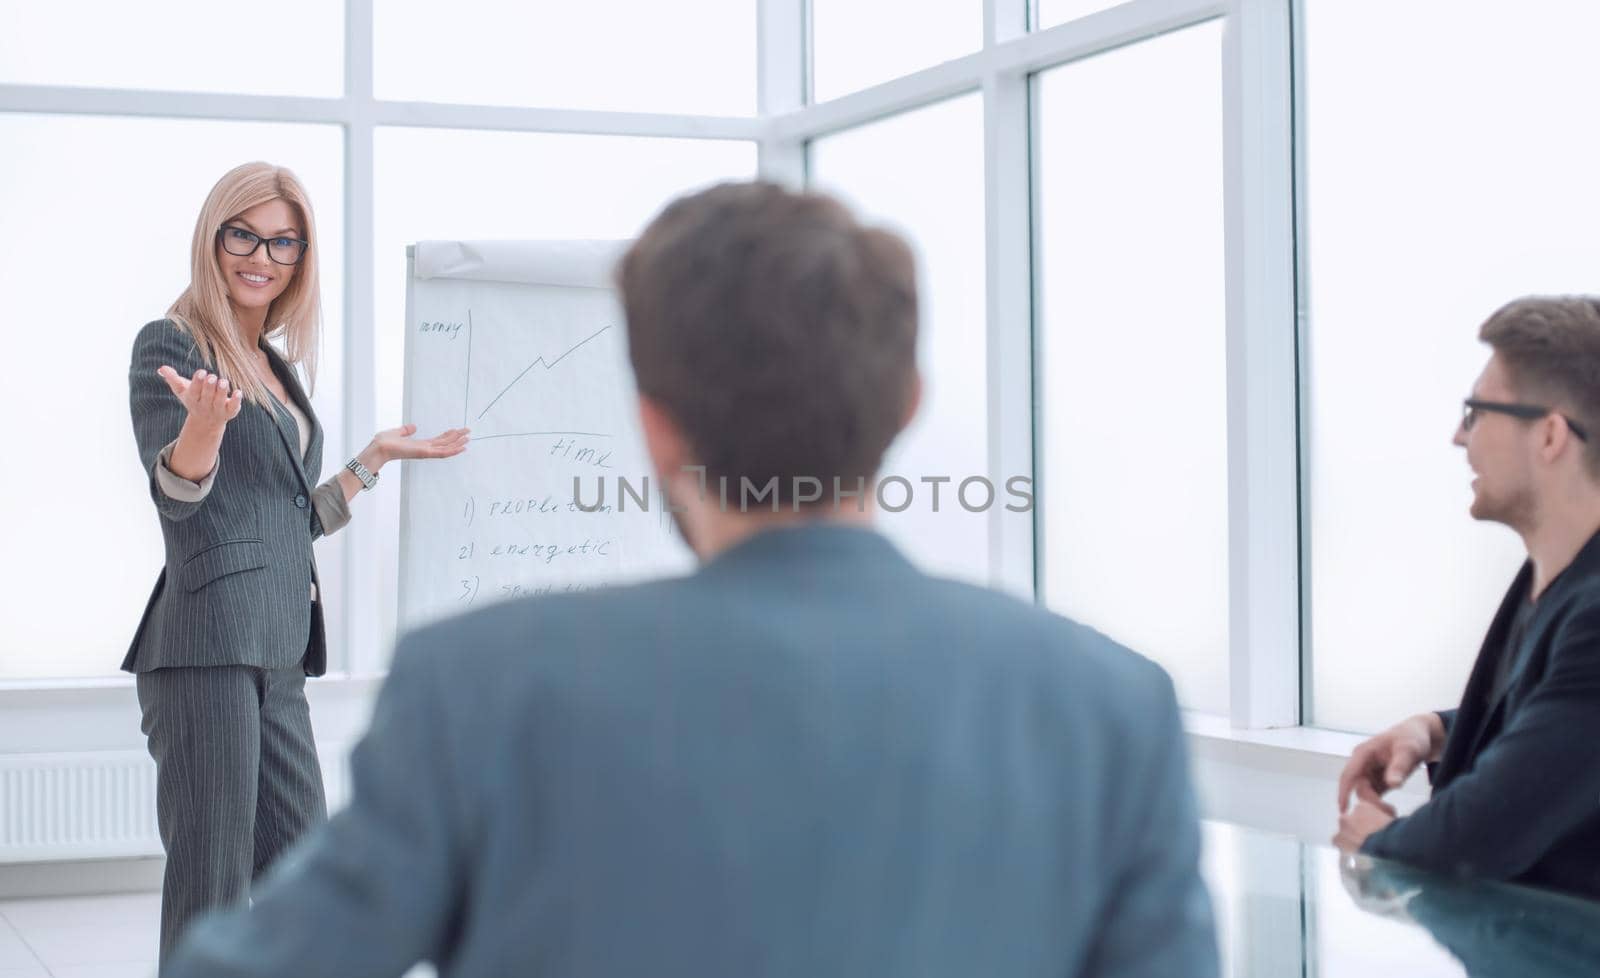 background image of business presentation in the office. photo with copy space